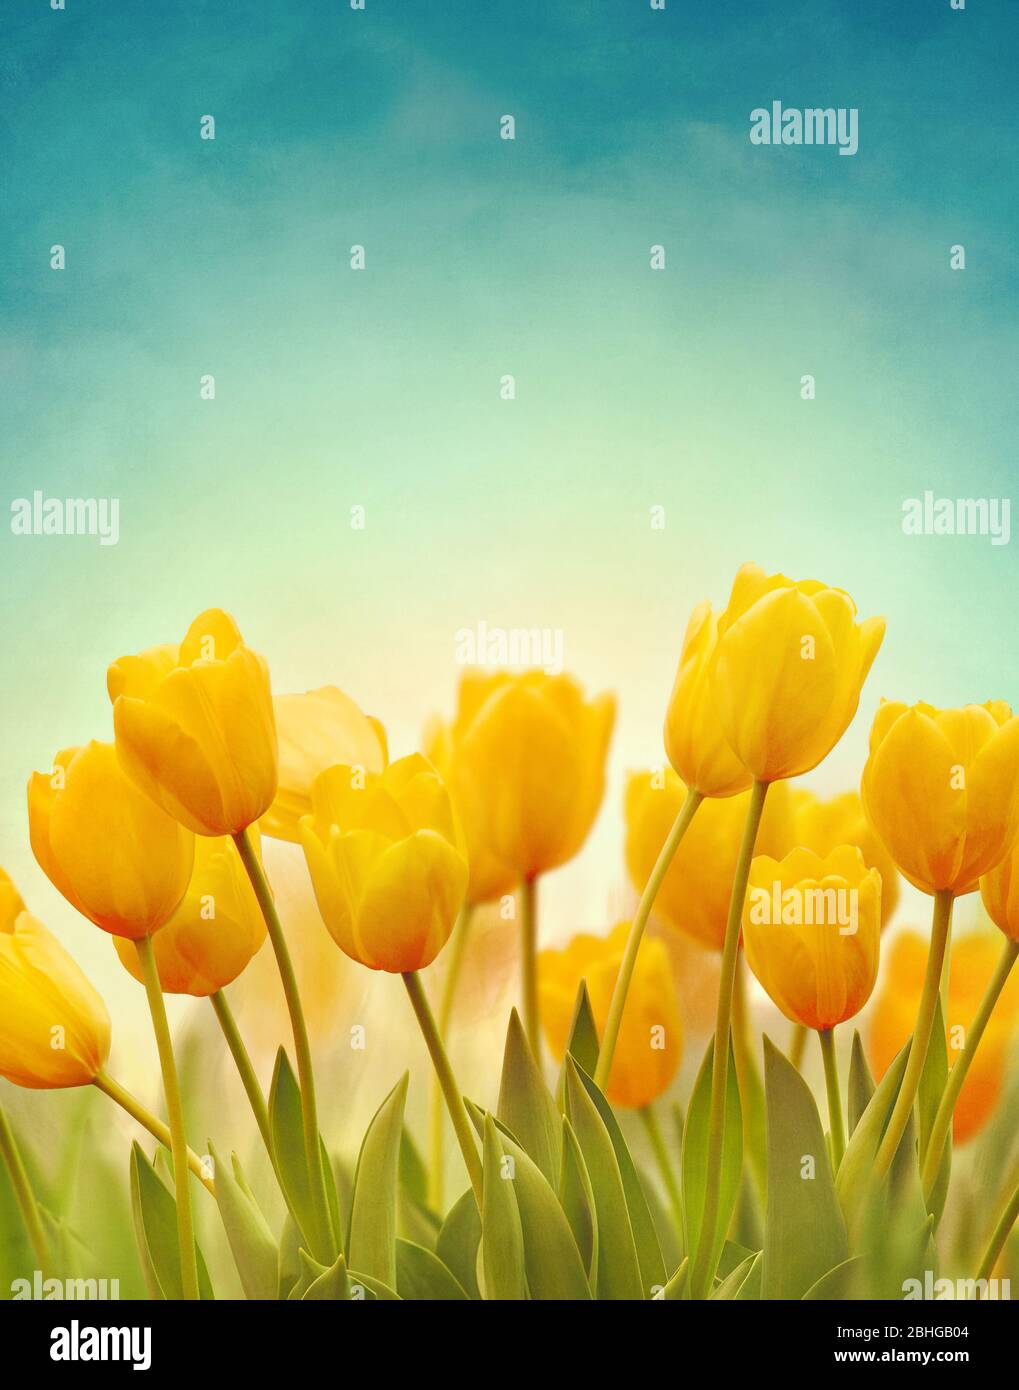 Spring Background Stock Photos and Images - 123RF